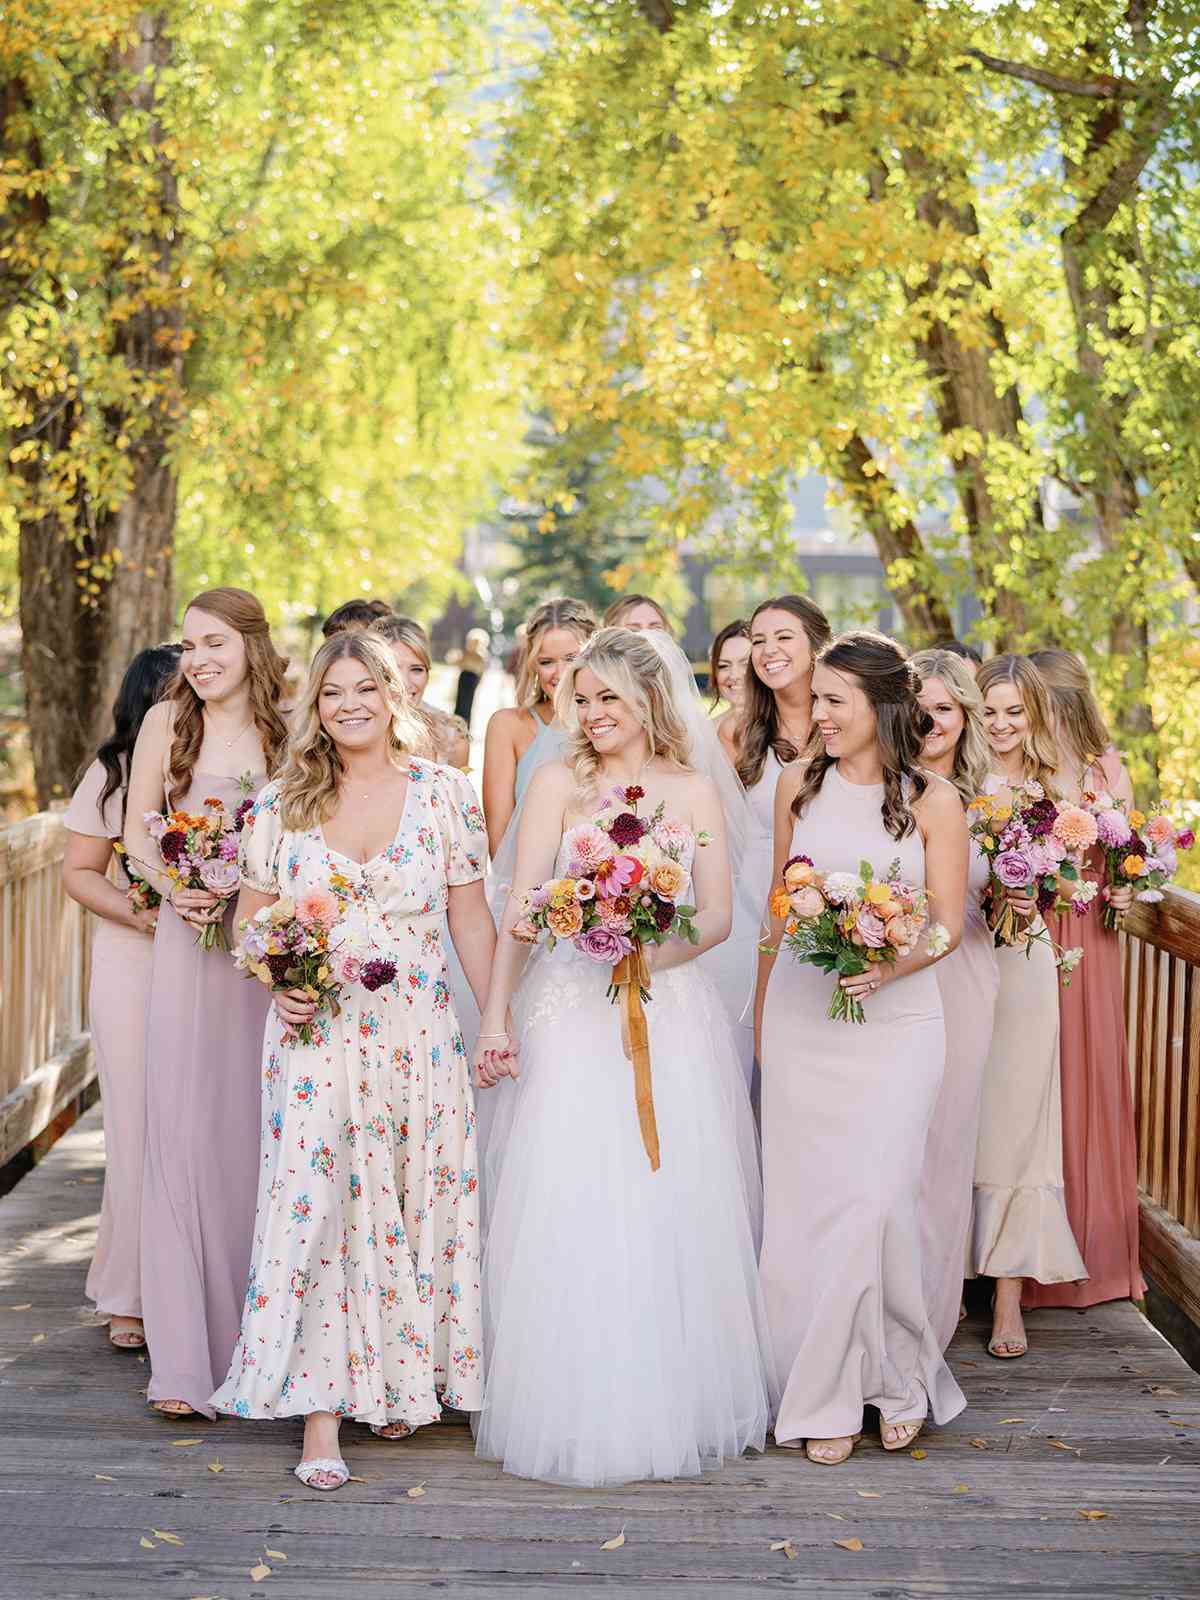 bride with bridesmaids in mismatched dresses walking on bridge